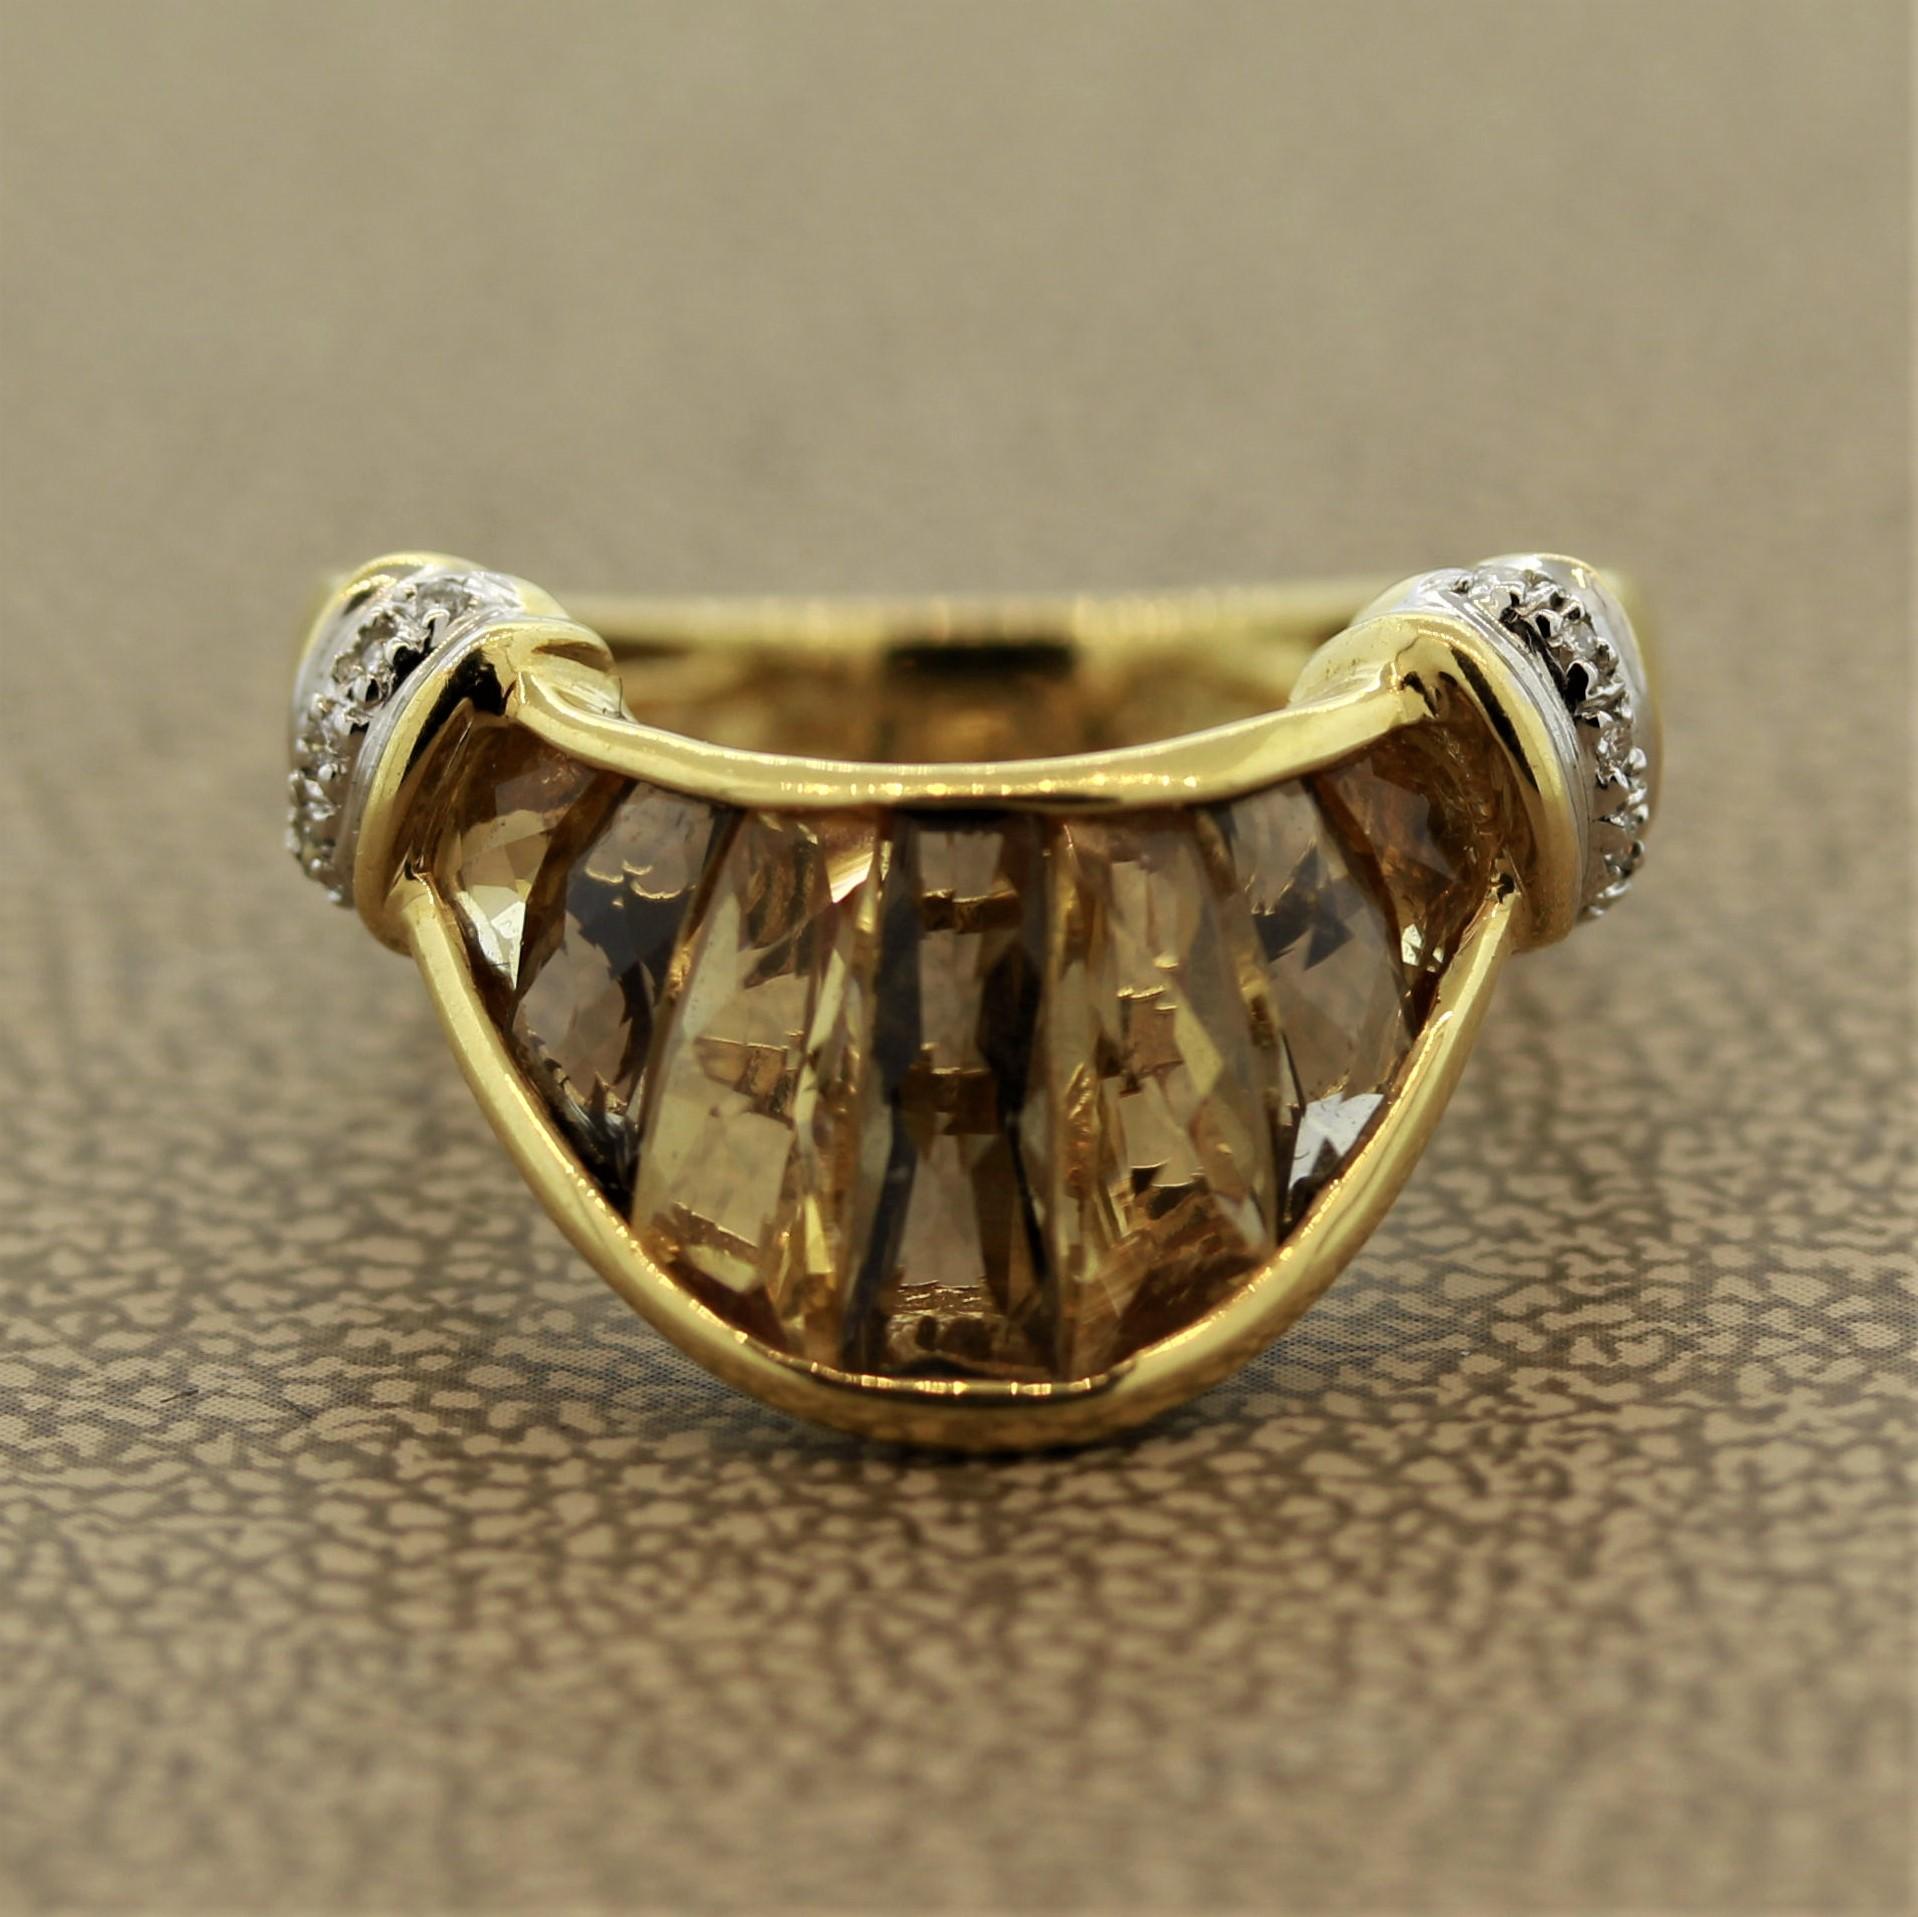 An Italian designed ring by Bellarri, it features 2.16 carats of smokey quartz and citrine set one after another in the center of the ring. Accenting the colored stones are 0.05 carats of round cut diamonds set in 18k yellow gold.

Ring Size: 7